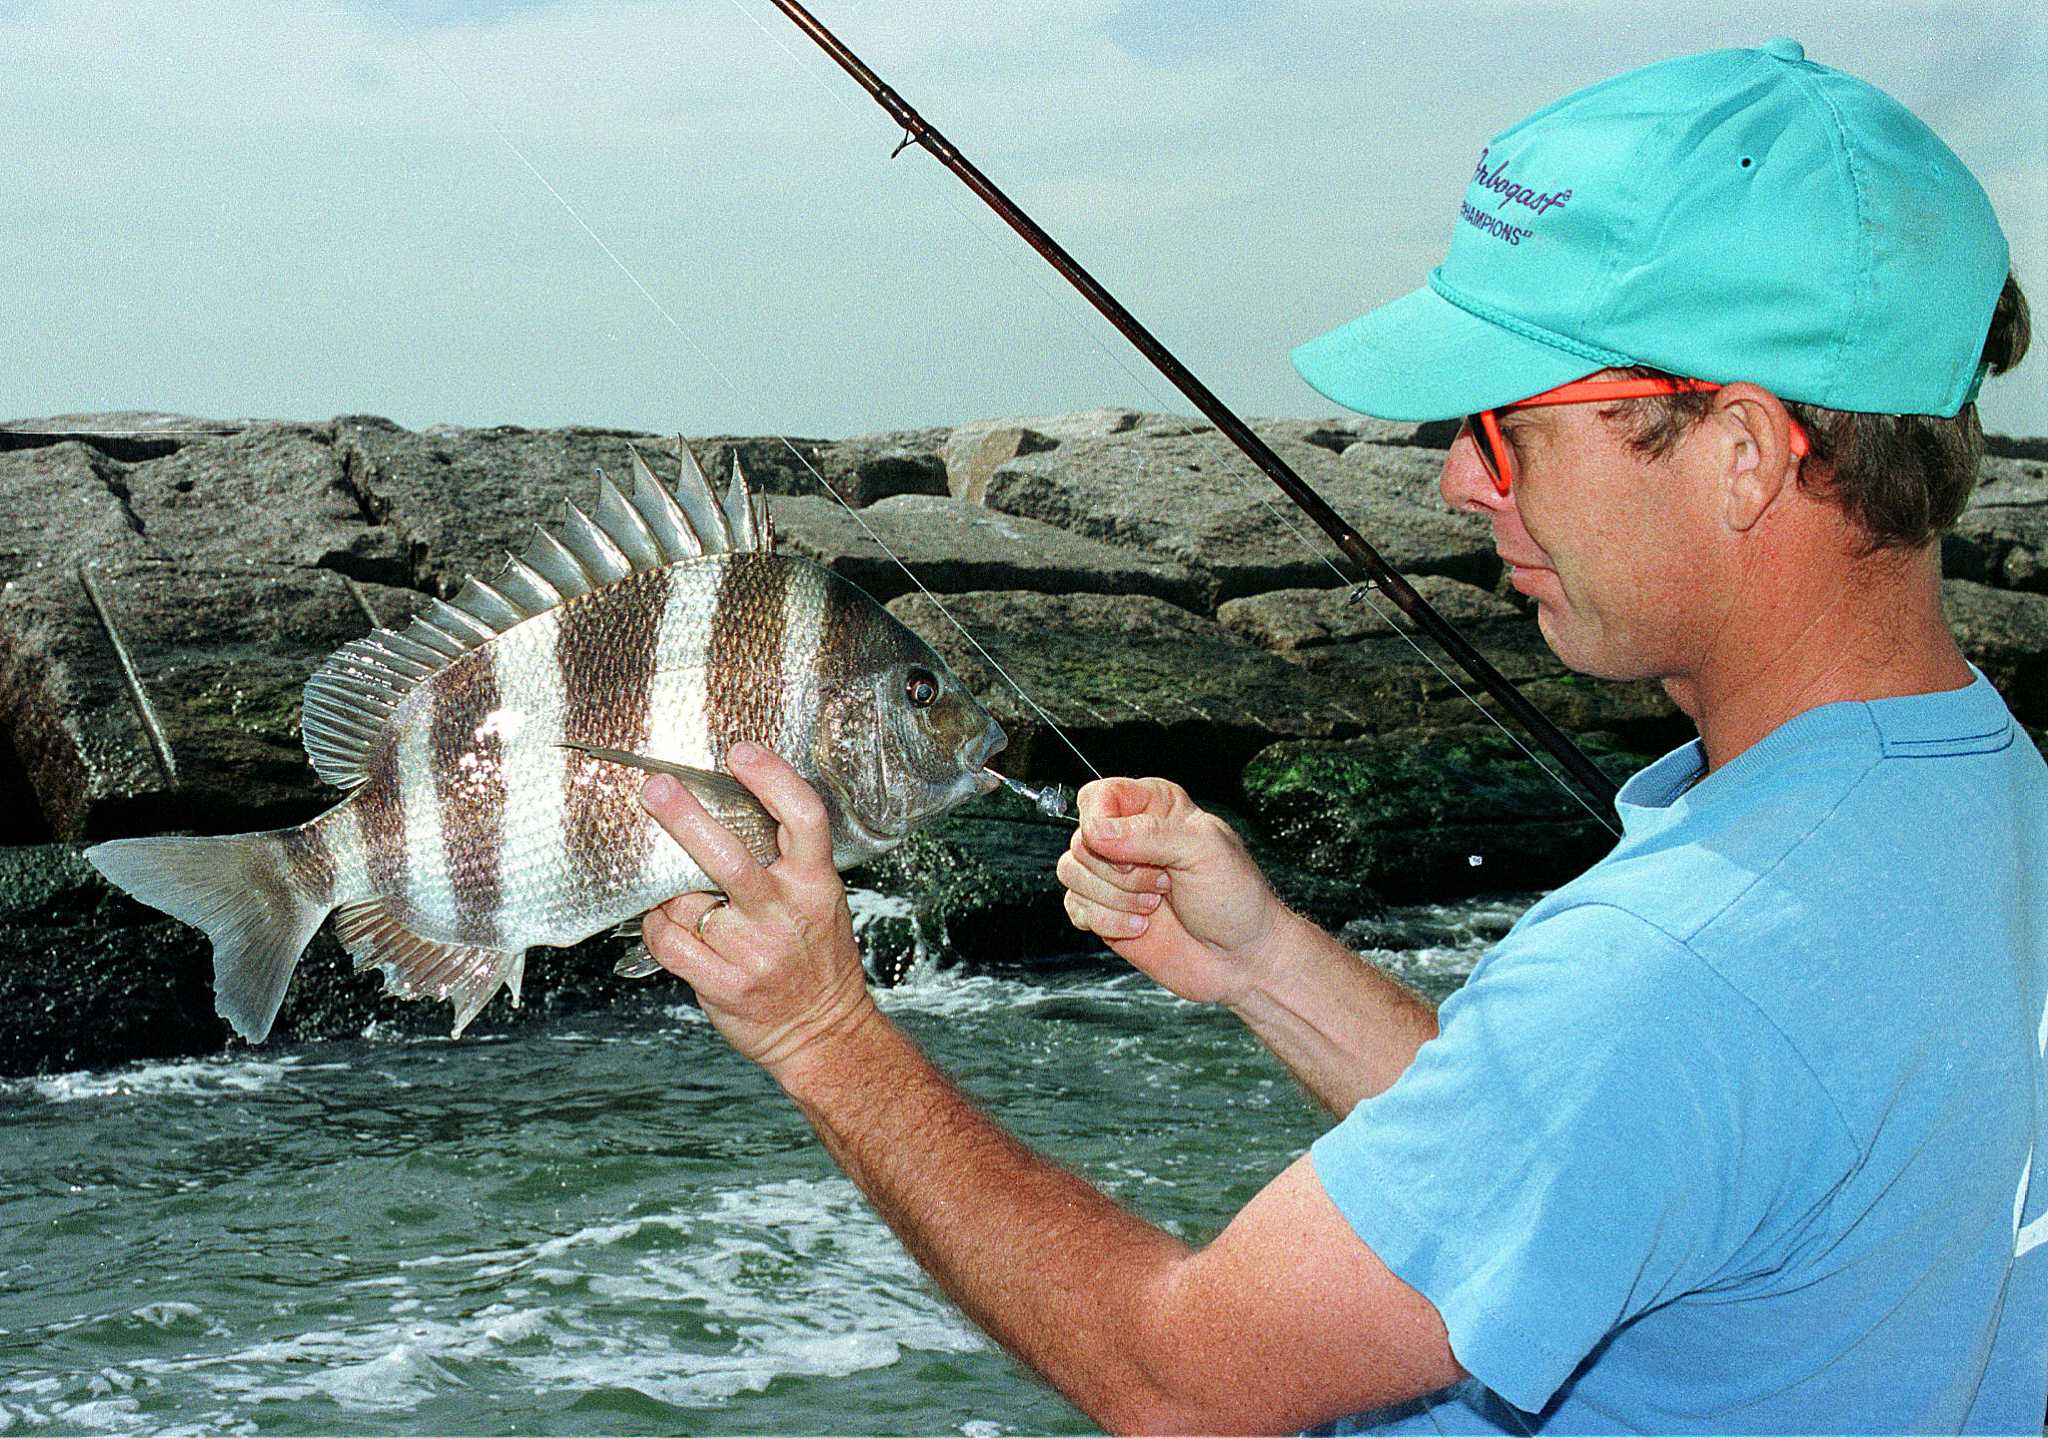 TPWD goes to great lengths to give anglers chance to hook stripers